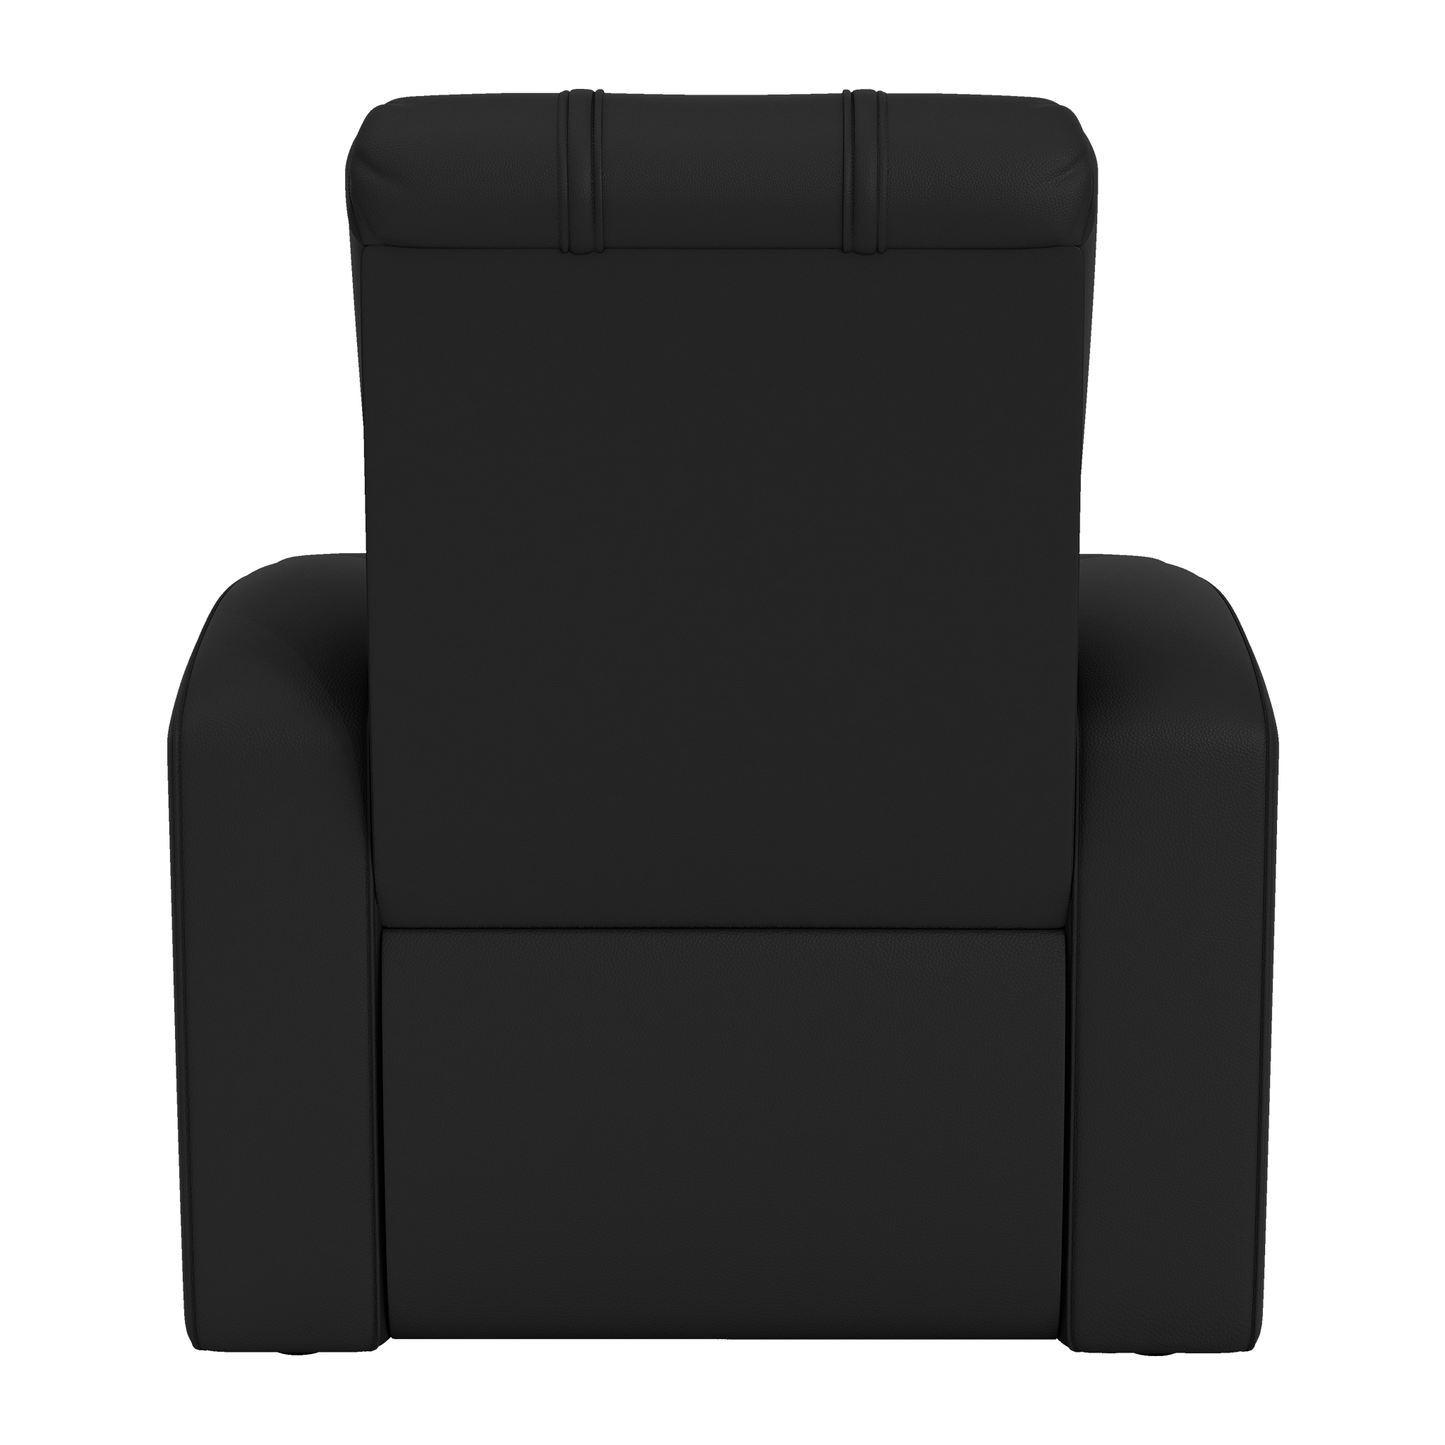 Relax Home Theater Recliner with Montreal Canadiens Logo